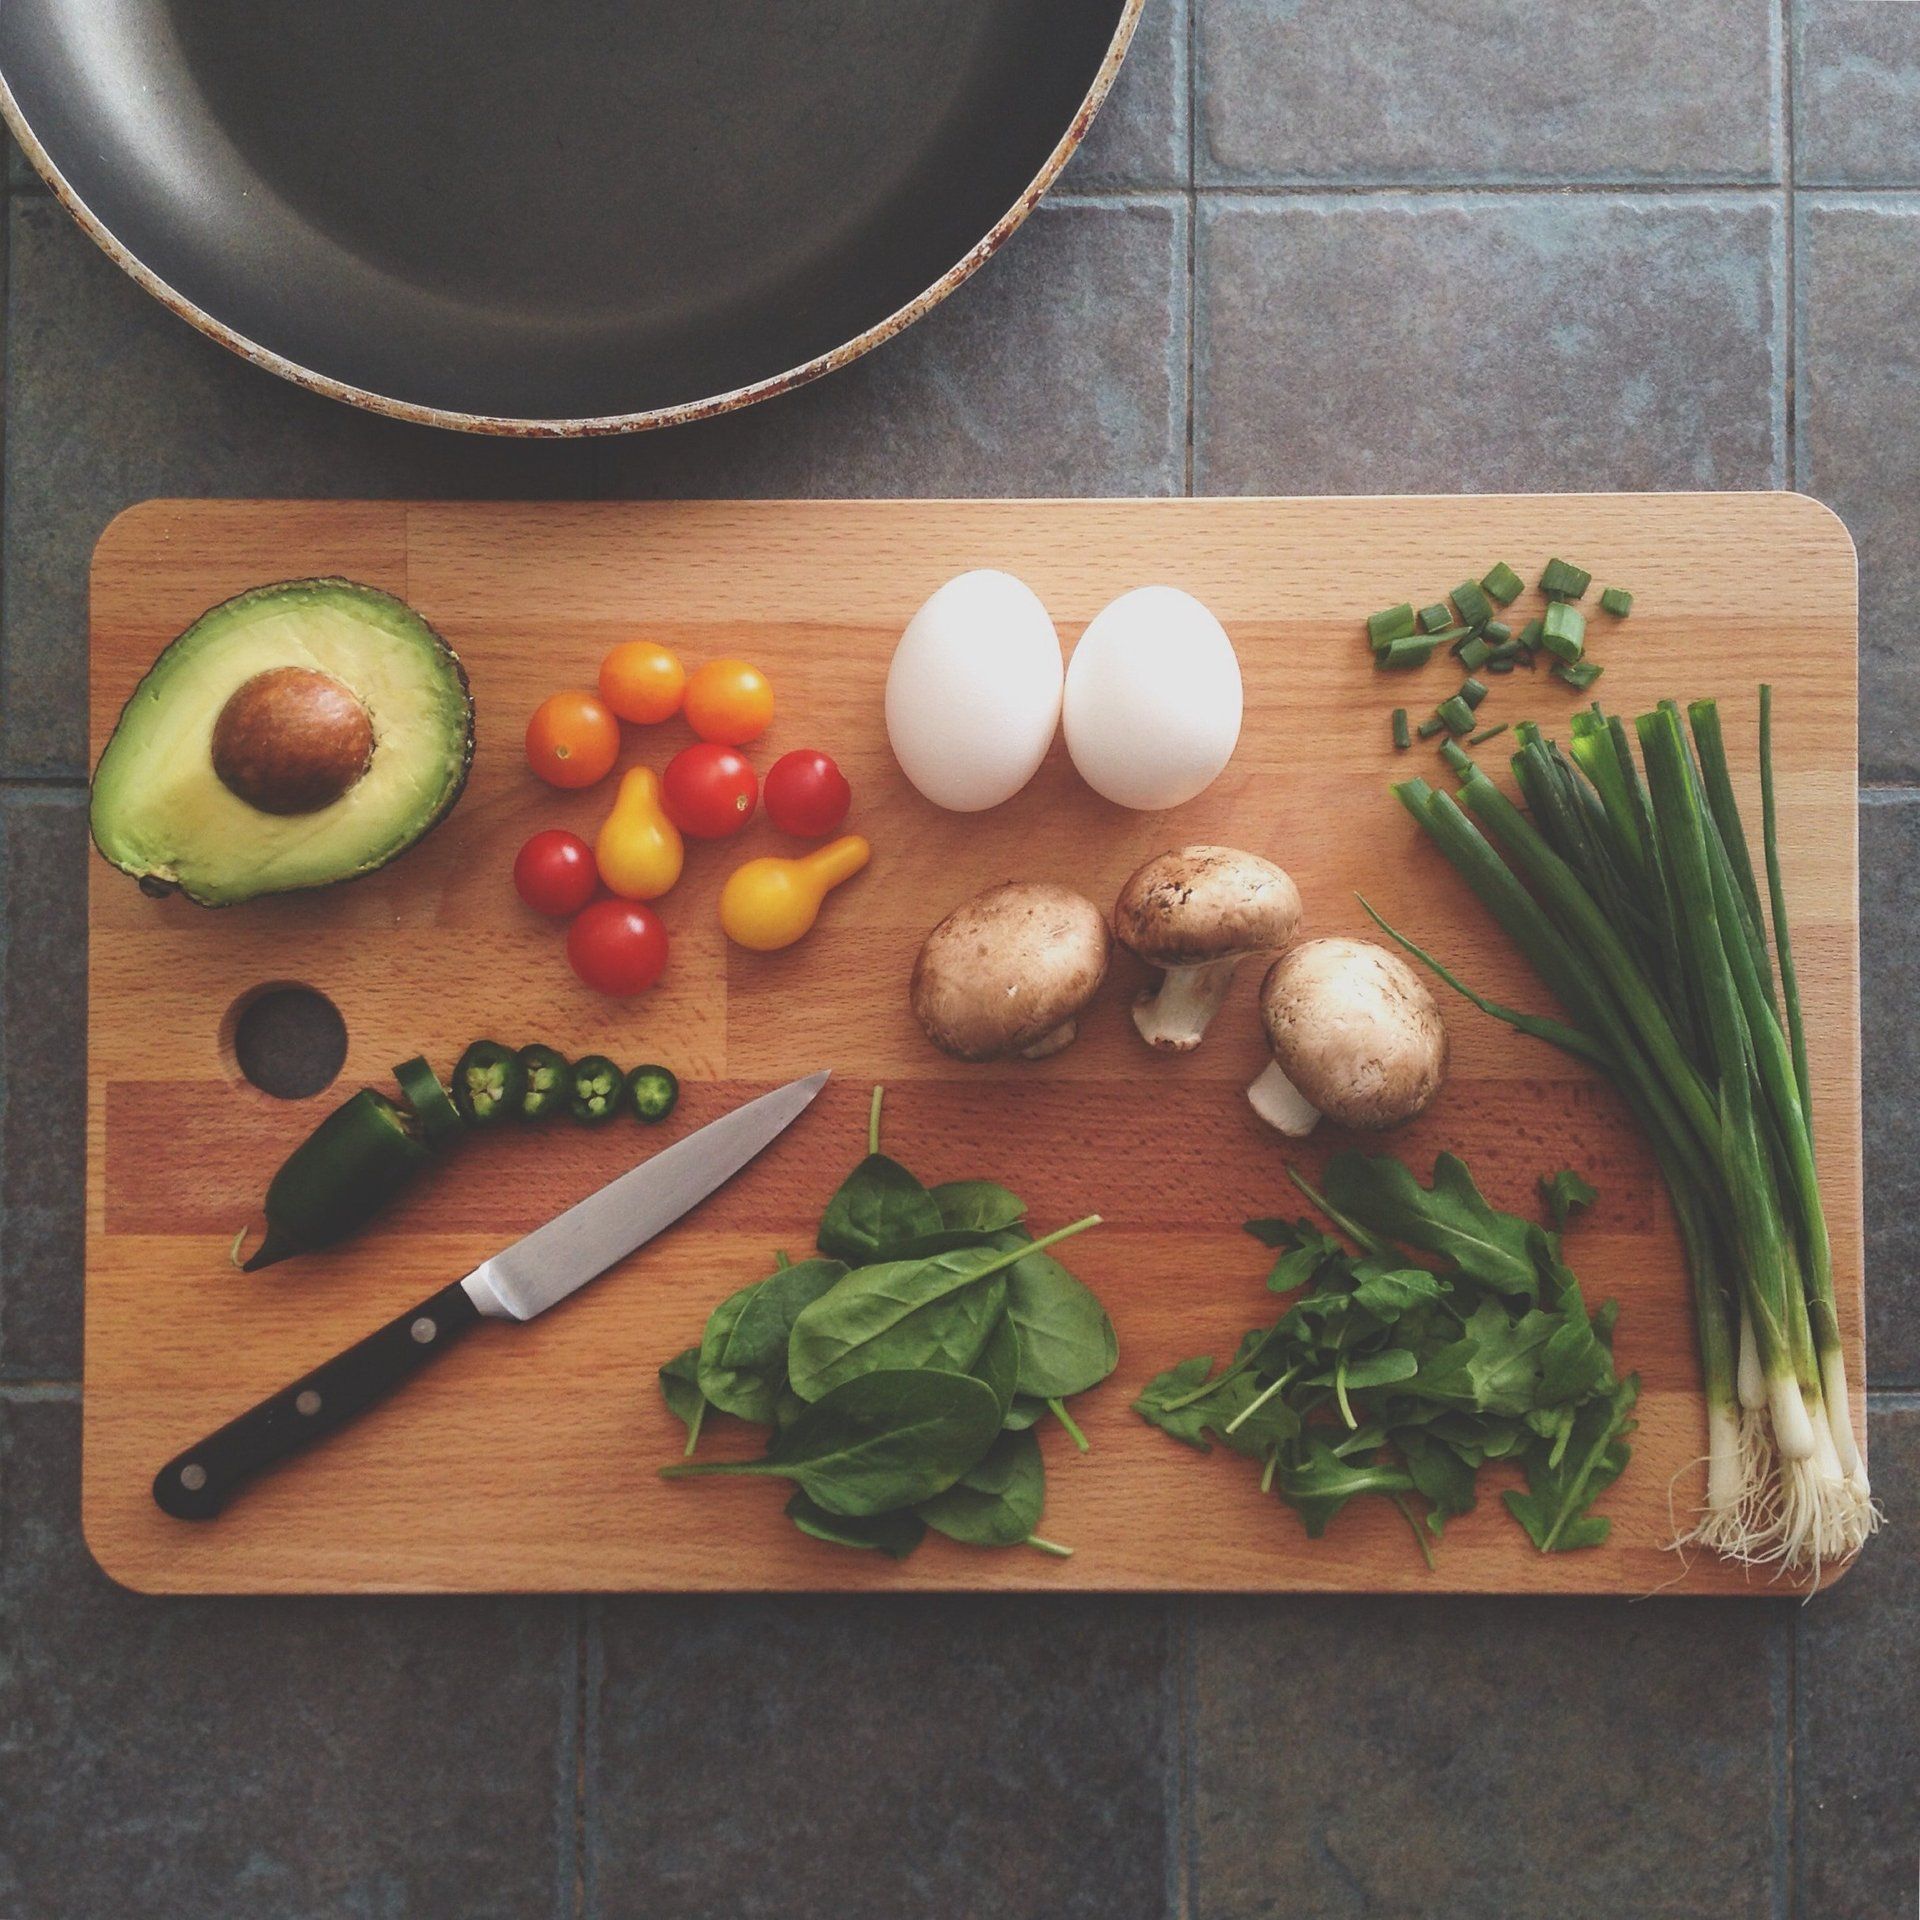 A wooden cutting board with vegetables and eggs on it